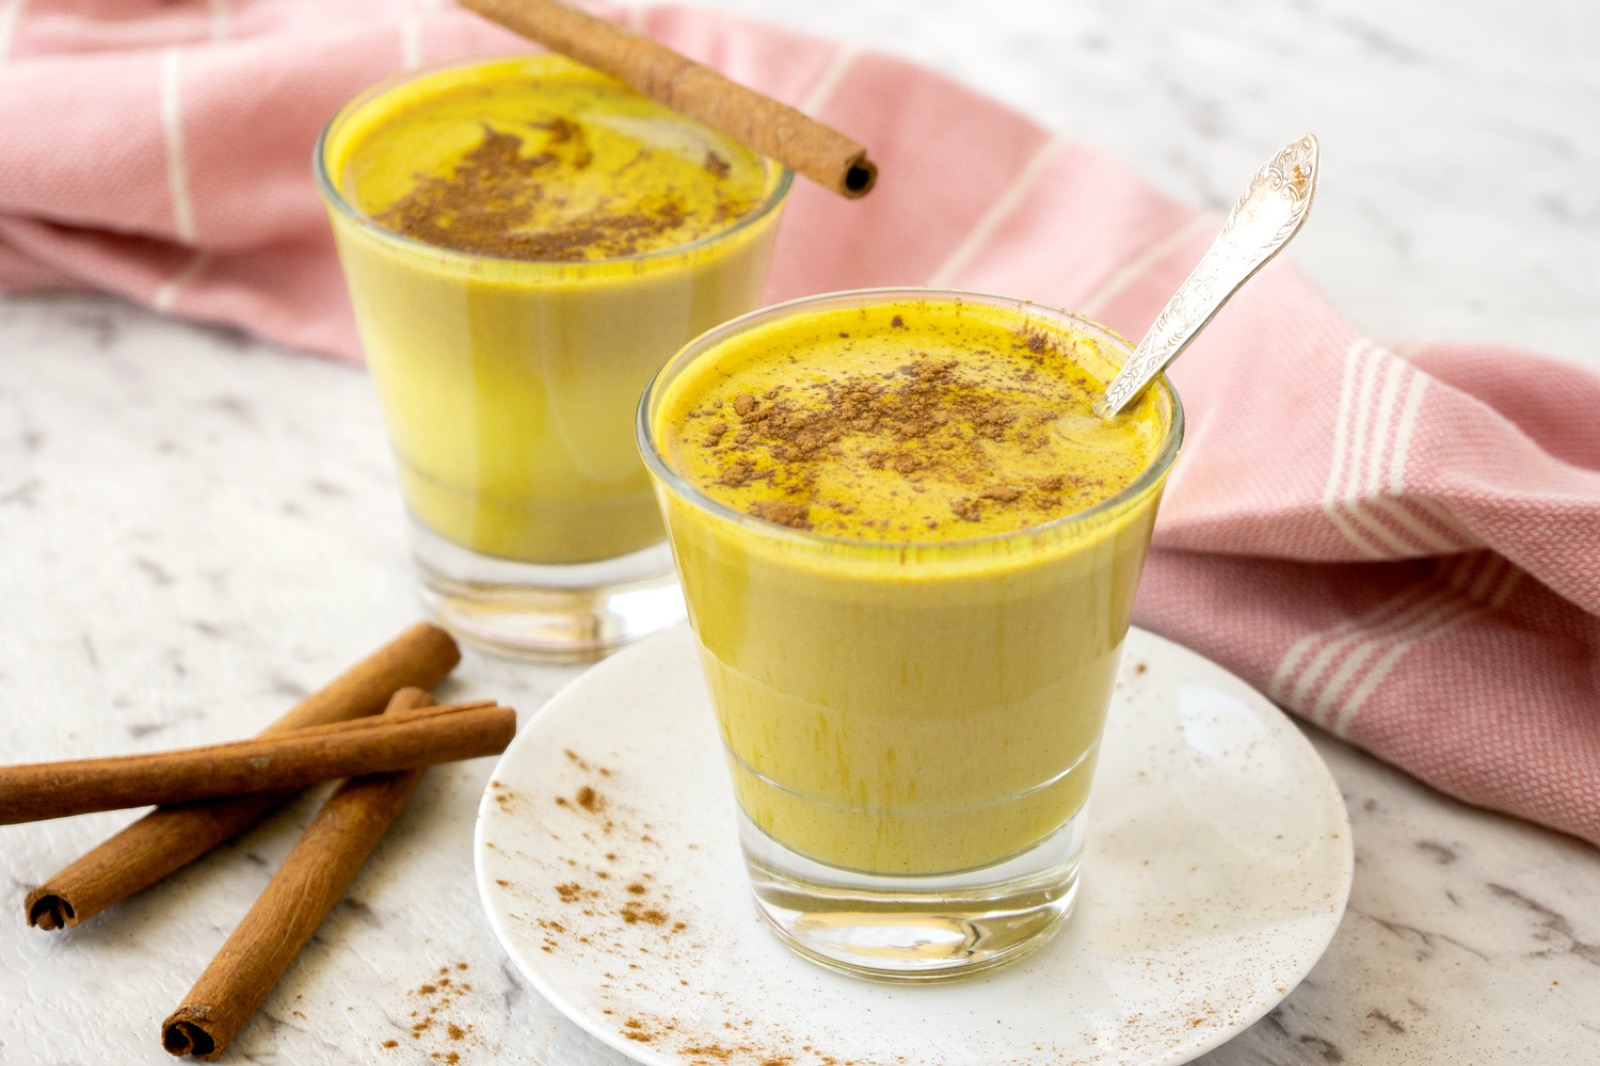 Say “Yum” Or “Yuck” to These Trendy Foods to Find Out What People Hate Most About You Turmeric latte